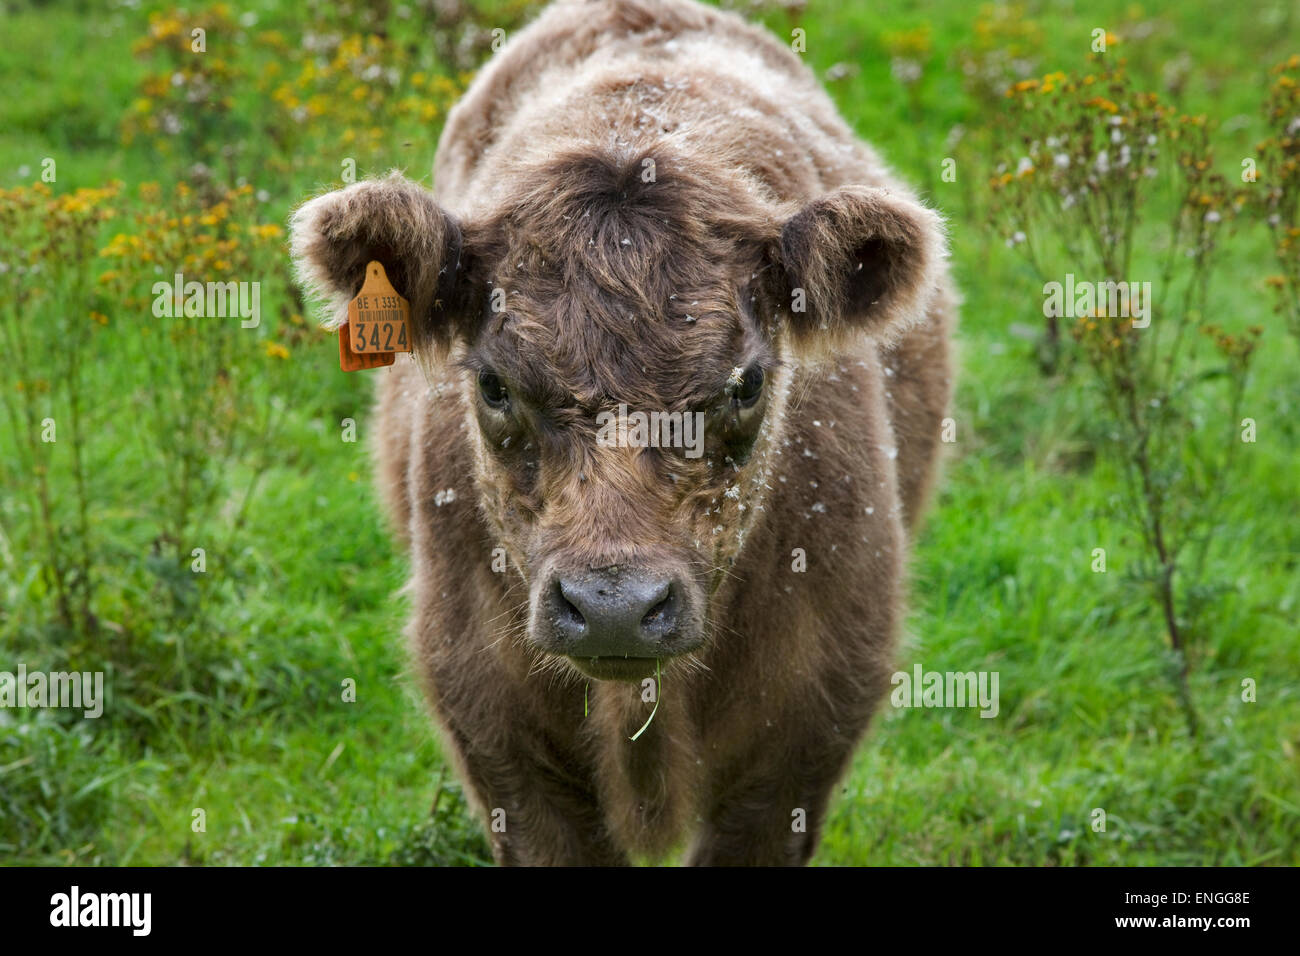 Galloway Cattle (Bos taurus galloway) cow in meadow with fur covered in flower seeds Stock Photo